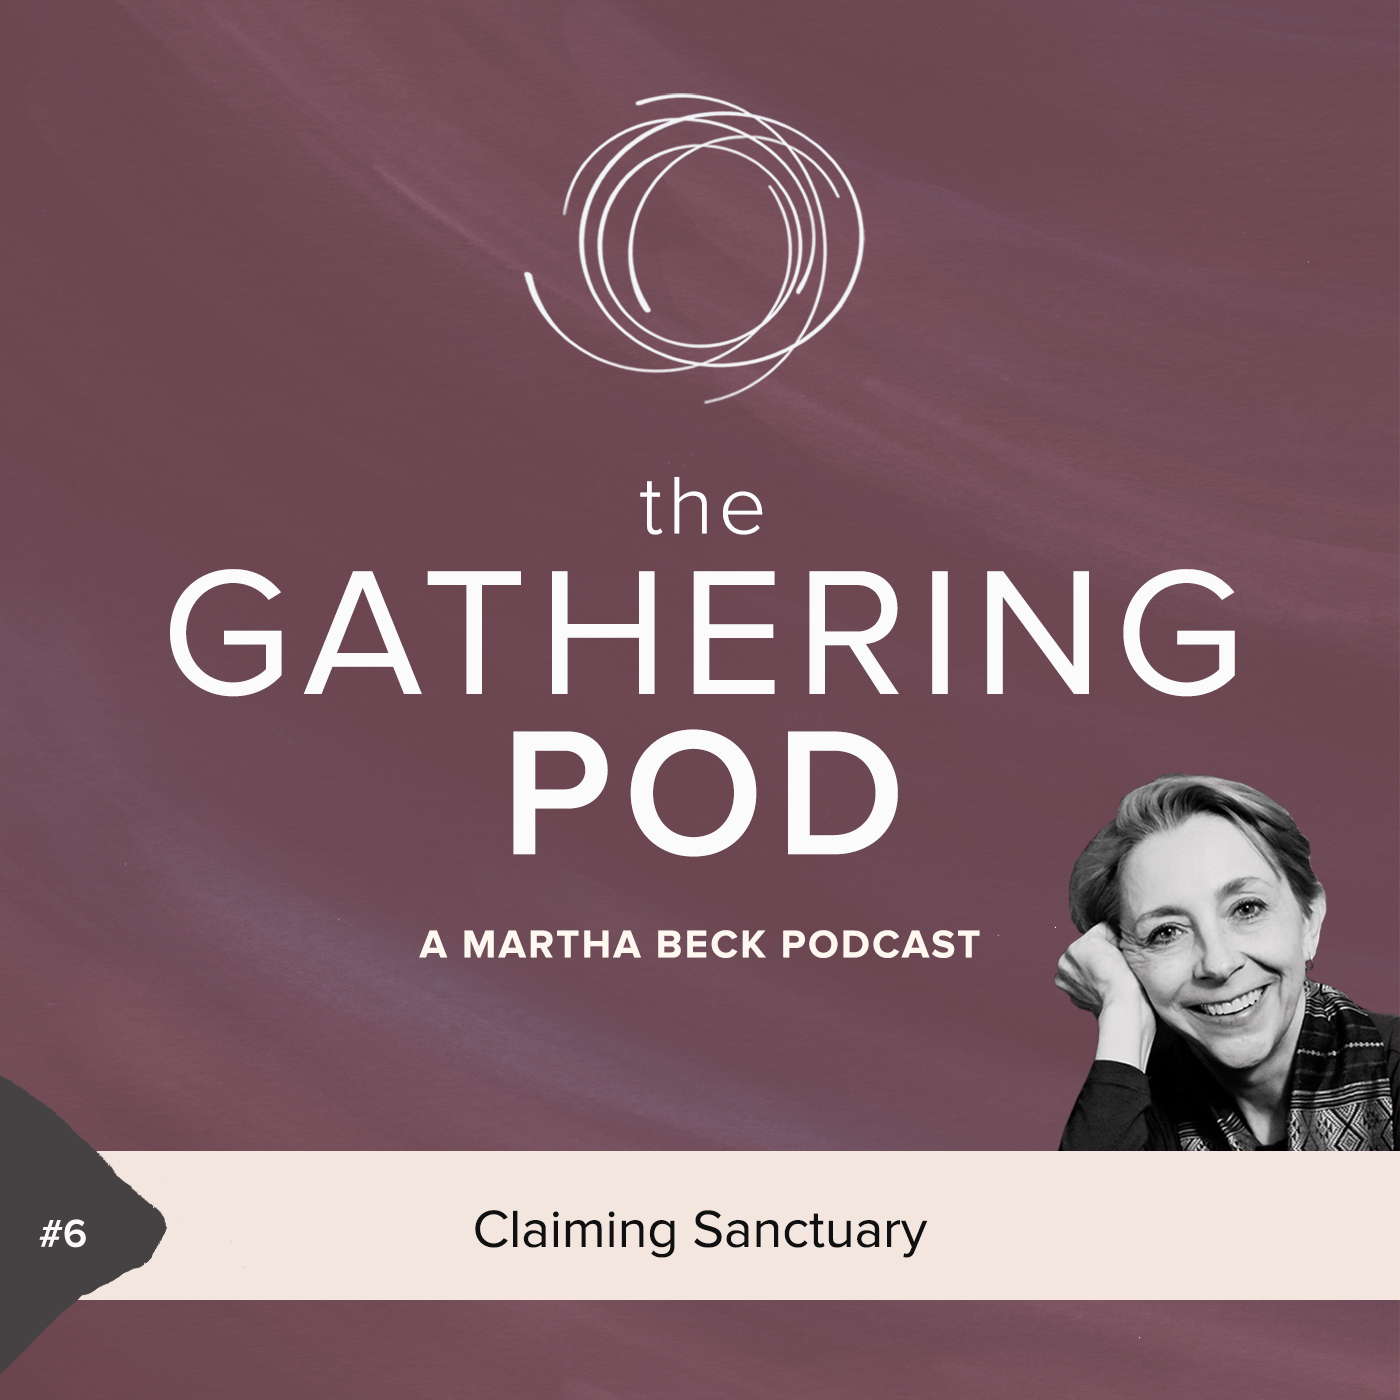 Image for The Gathering Pod A Martha Beck Podcast Episode #6 Claiming Sanctuary